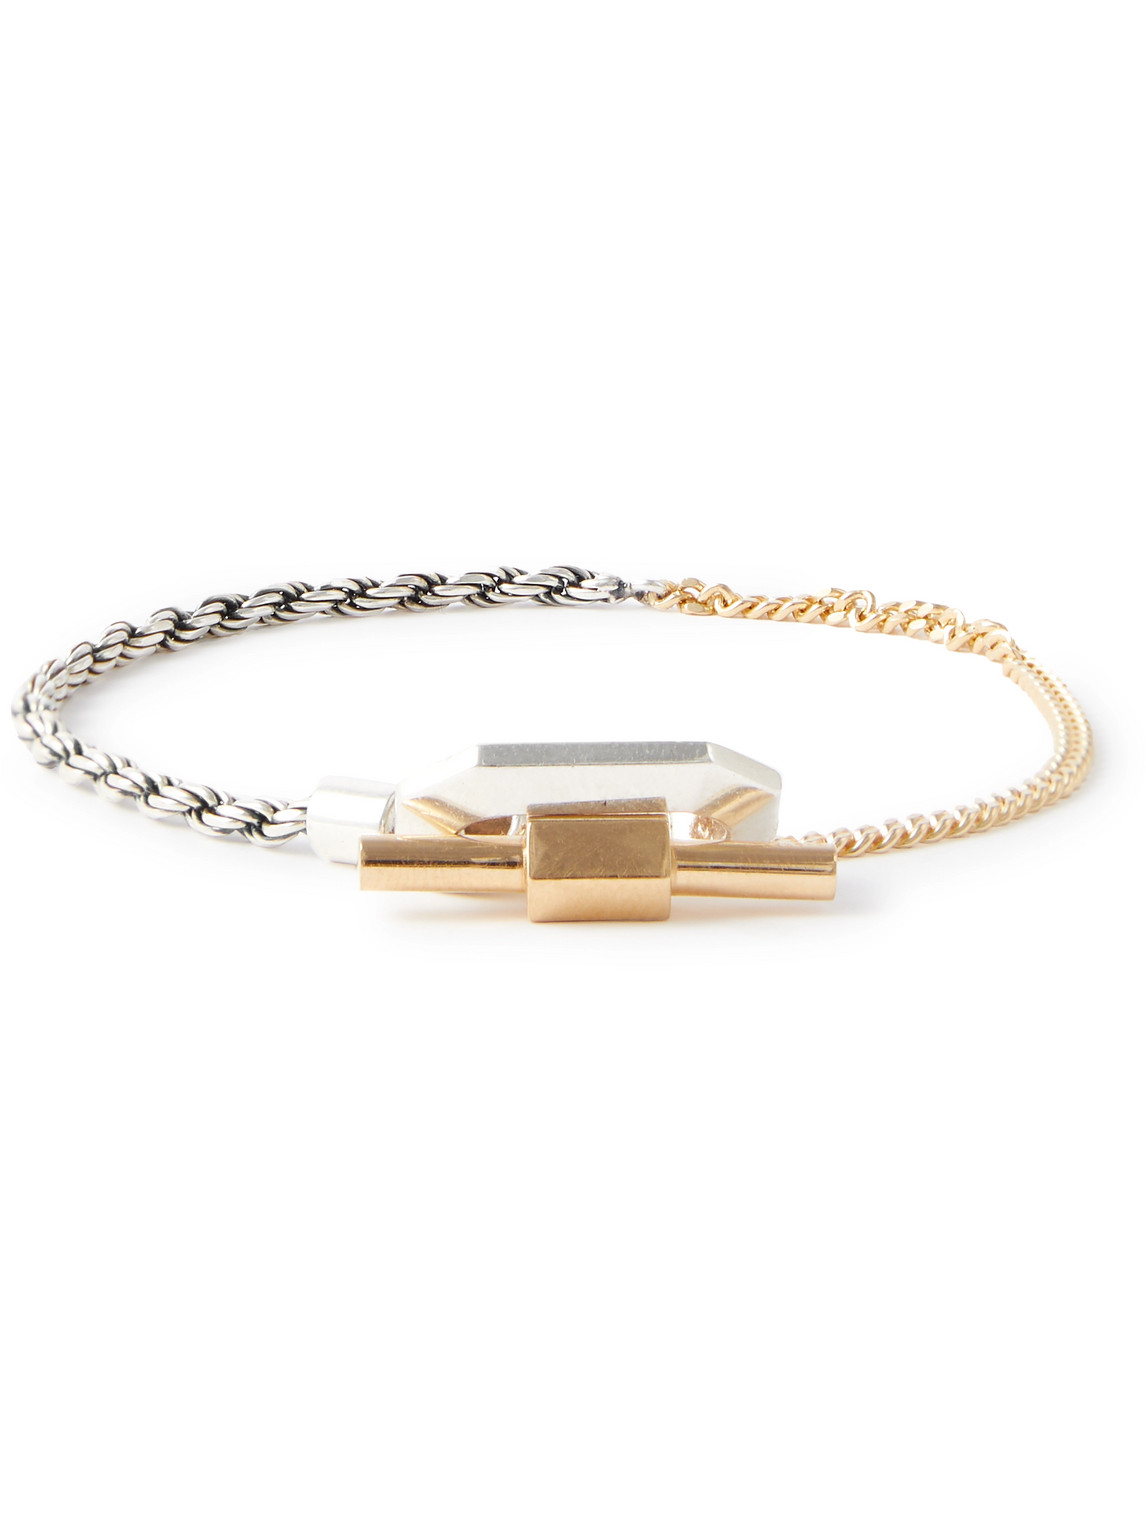 Gold-Plated and Sterling Silver Bracelet